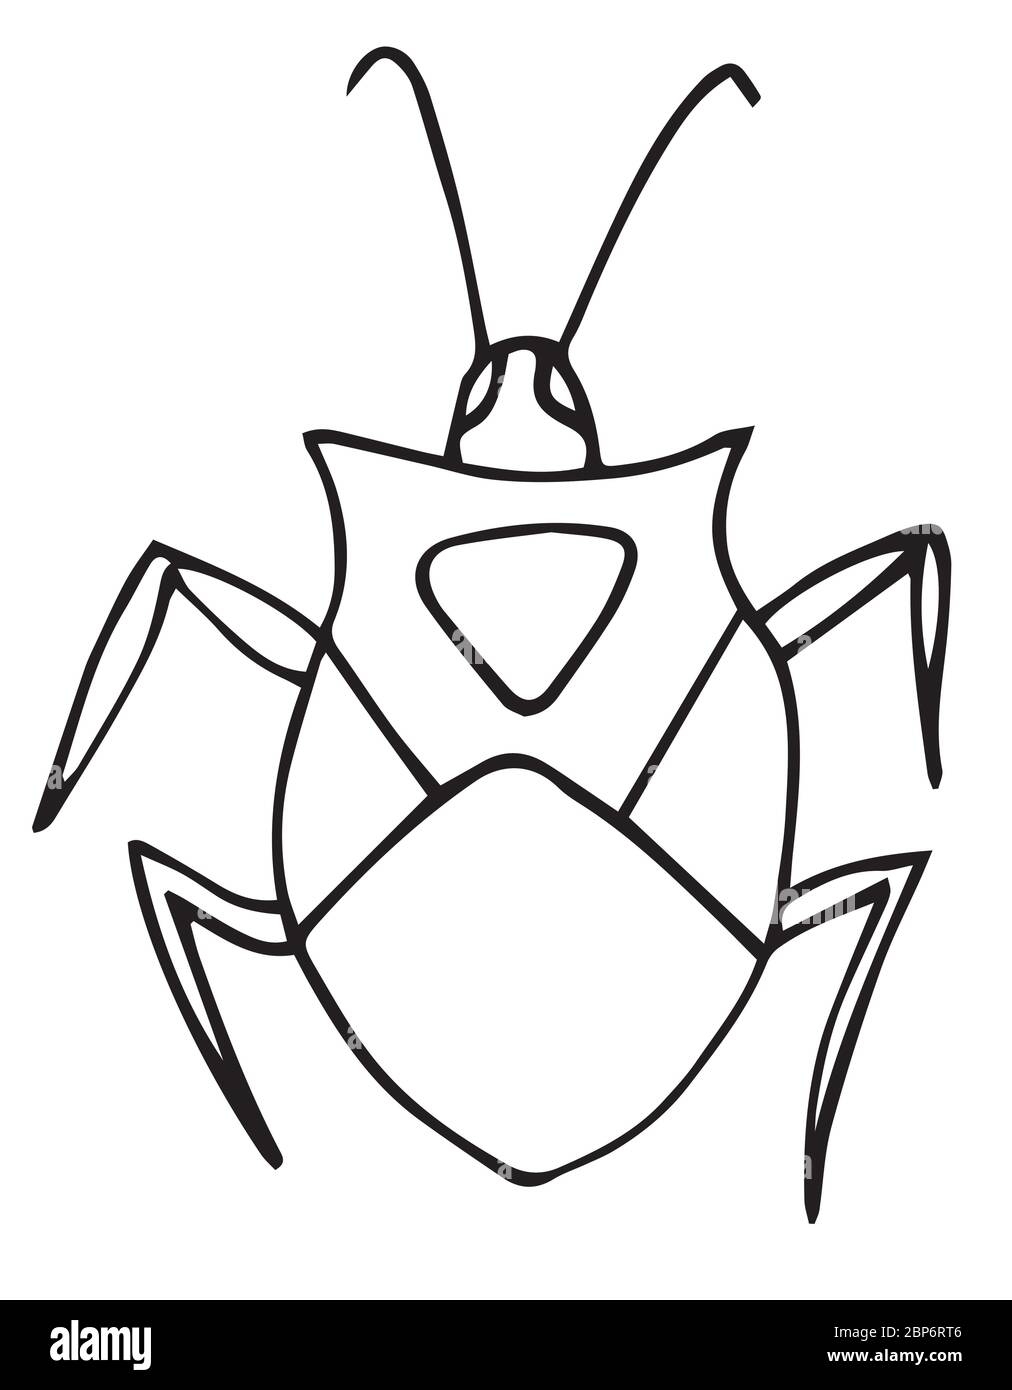 Bug coloring page for kids outline vector picture isolated stock vector image art